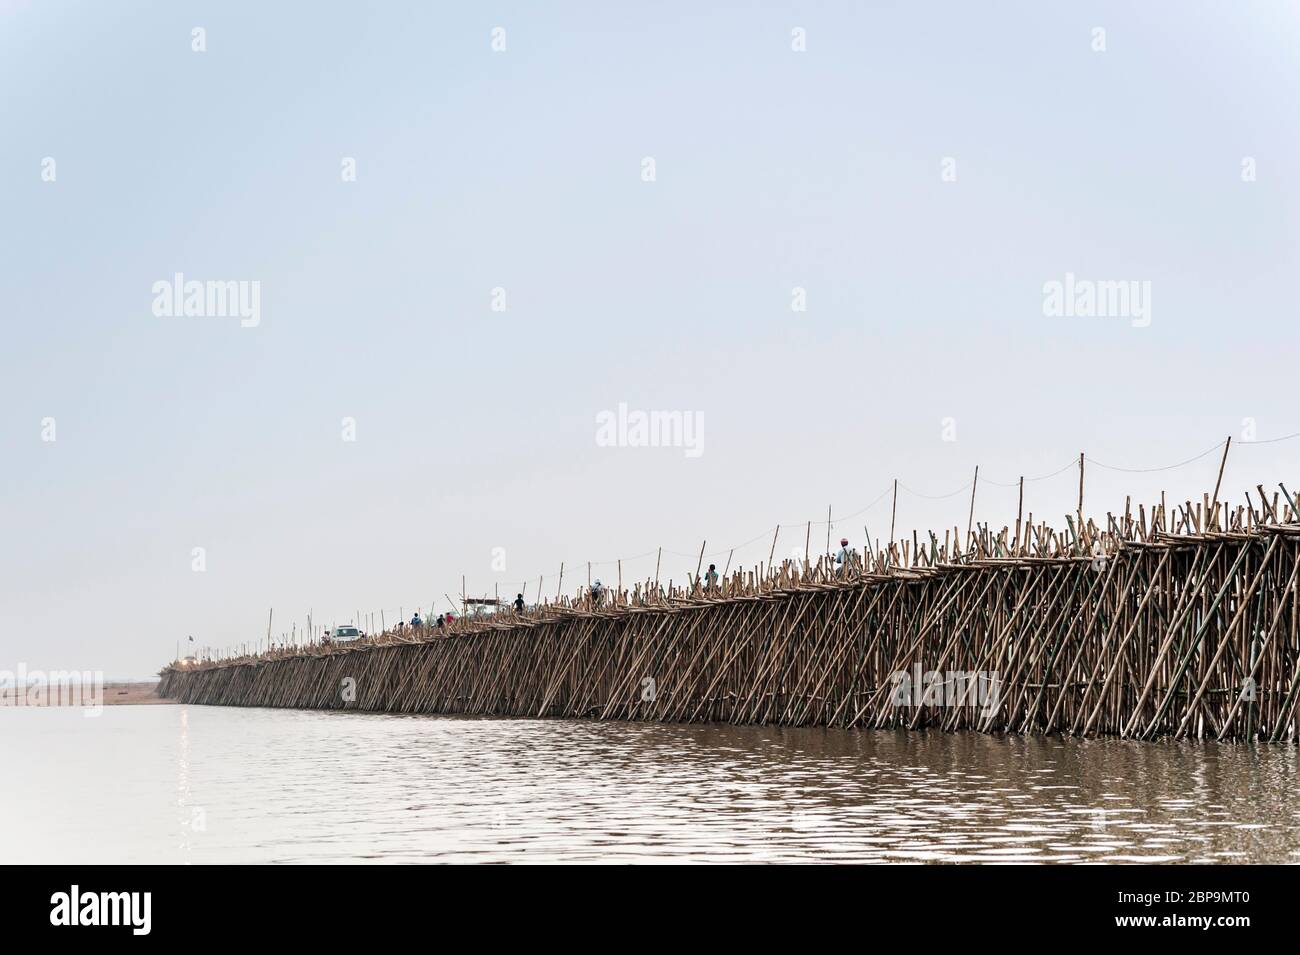 Bamboo bridge over the Mekong River at twilight. Kampong Cham, Cambodia, Southeast Asia Stock Photo